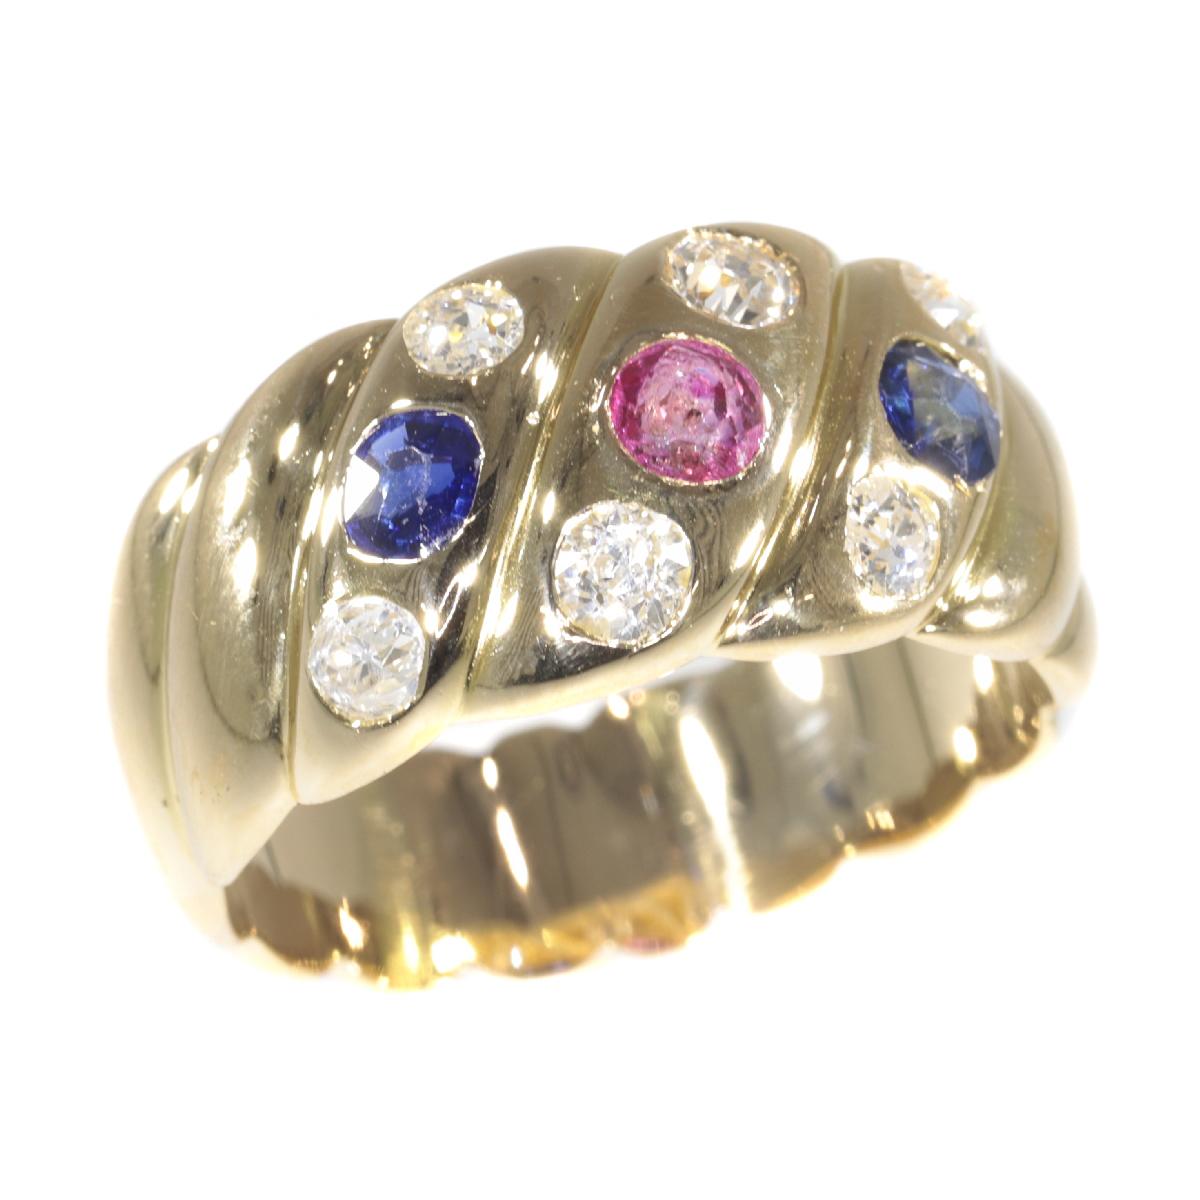 Antique 18 Karat Gold Victorian Diamond Sapphire and Ruby Engagement Ring, 1880s For Sale 5